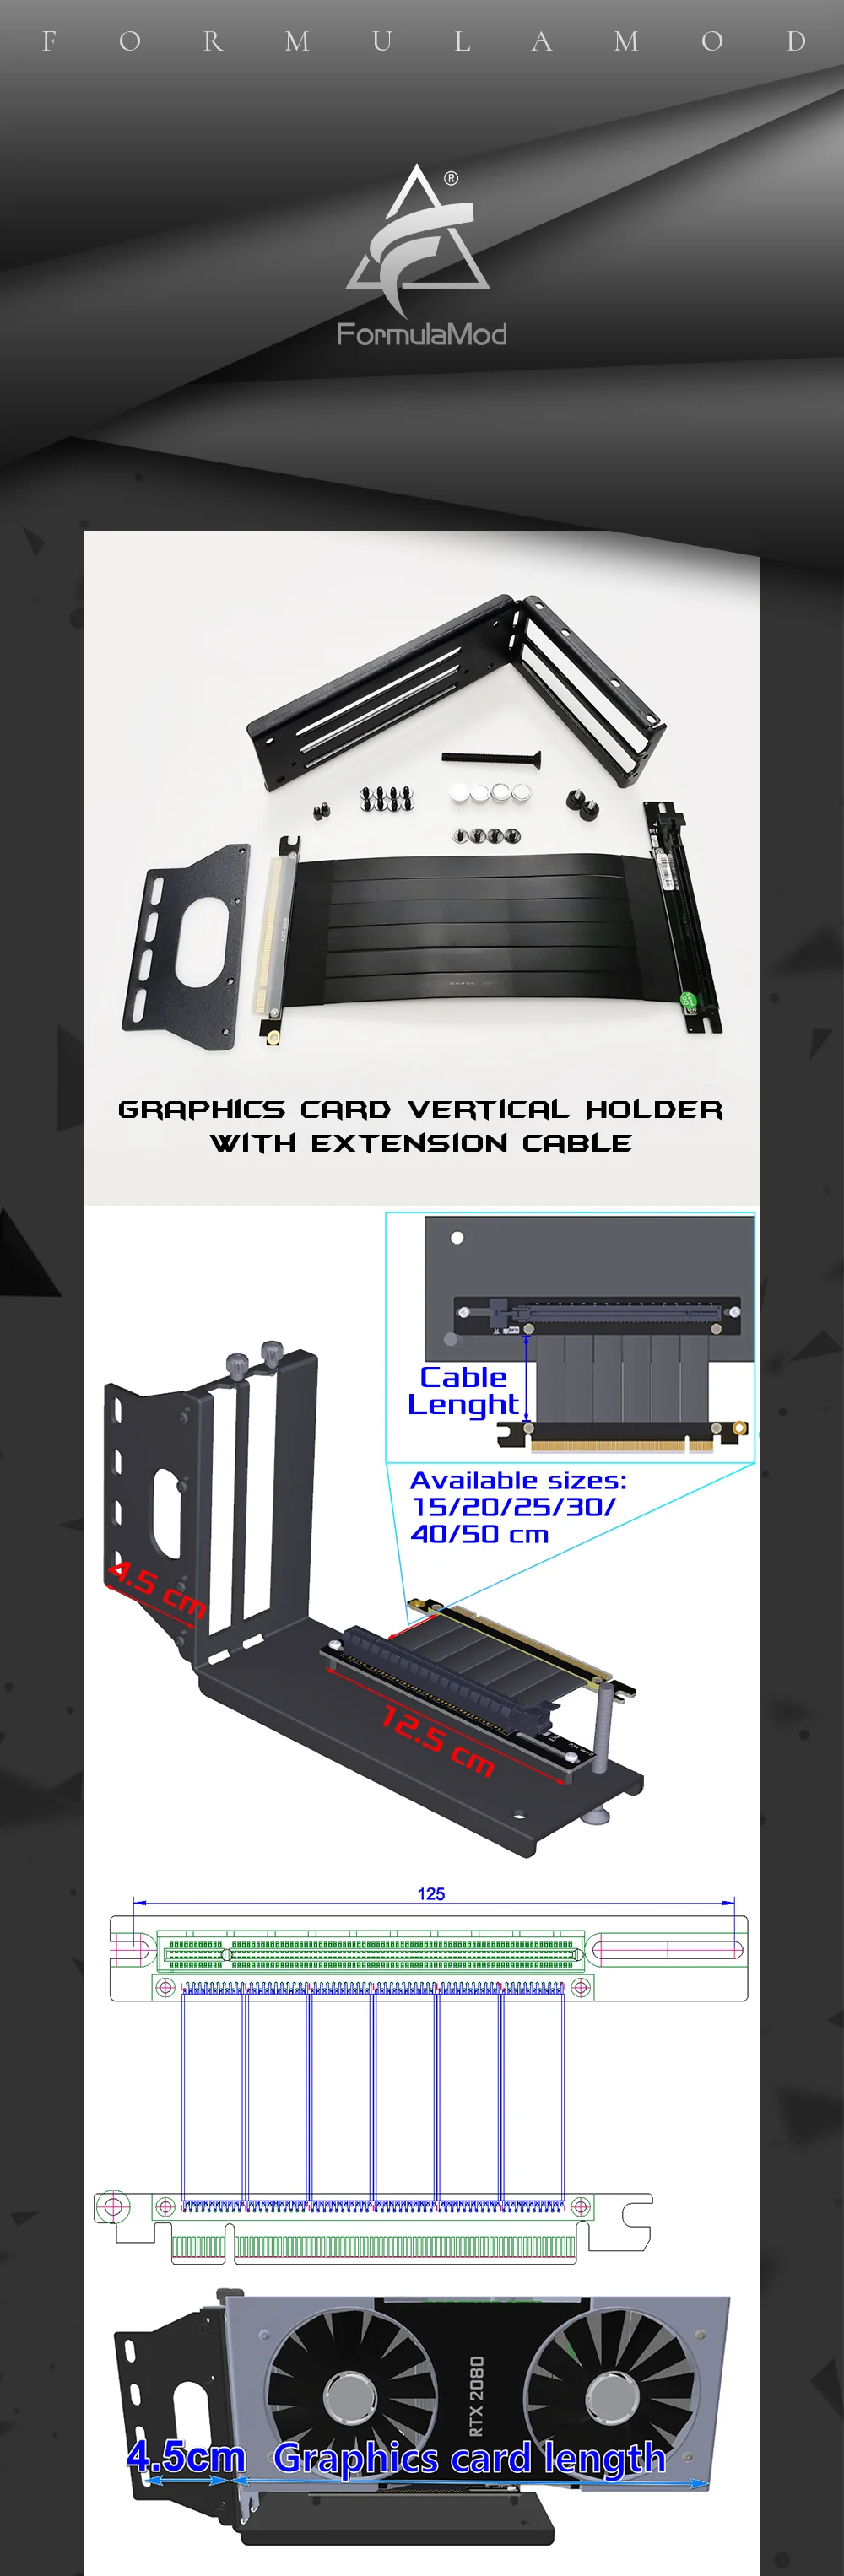 FormulaMod Fm-ZJYCX, Graphics Card Vertical Holder With Extension Cable, Fixed GPU Vertical, PCI-E Built-in Steering Bracket  